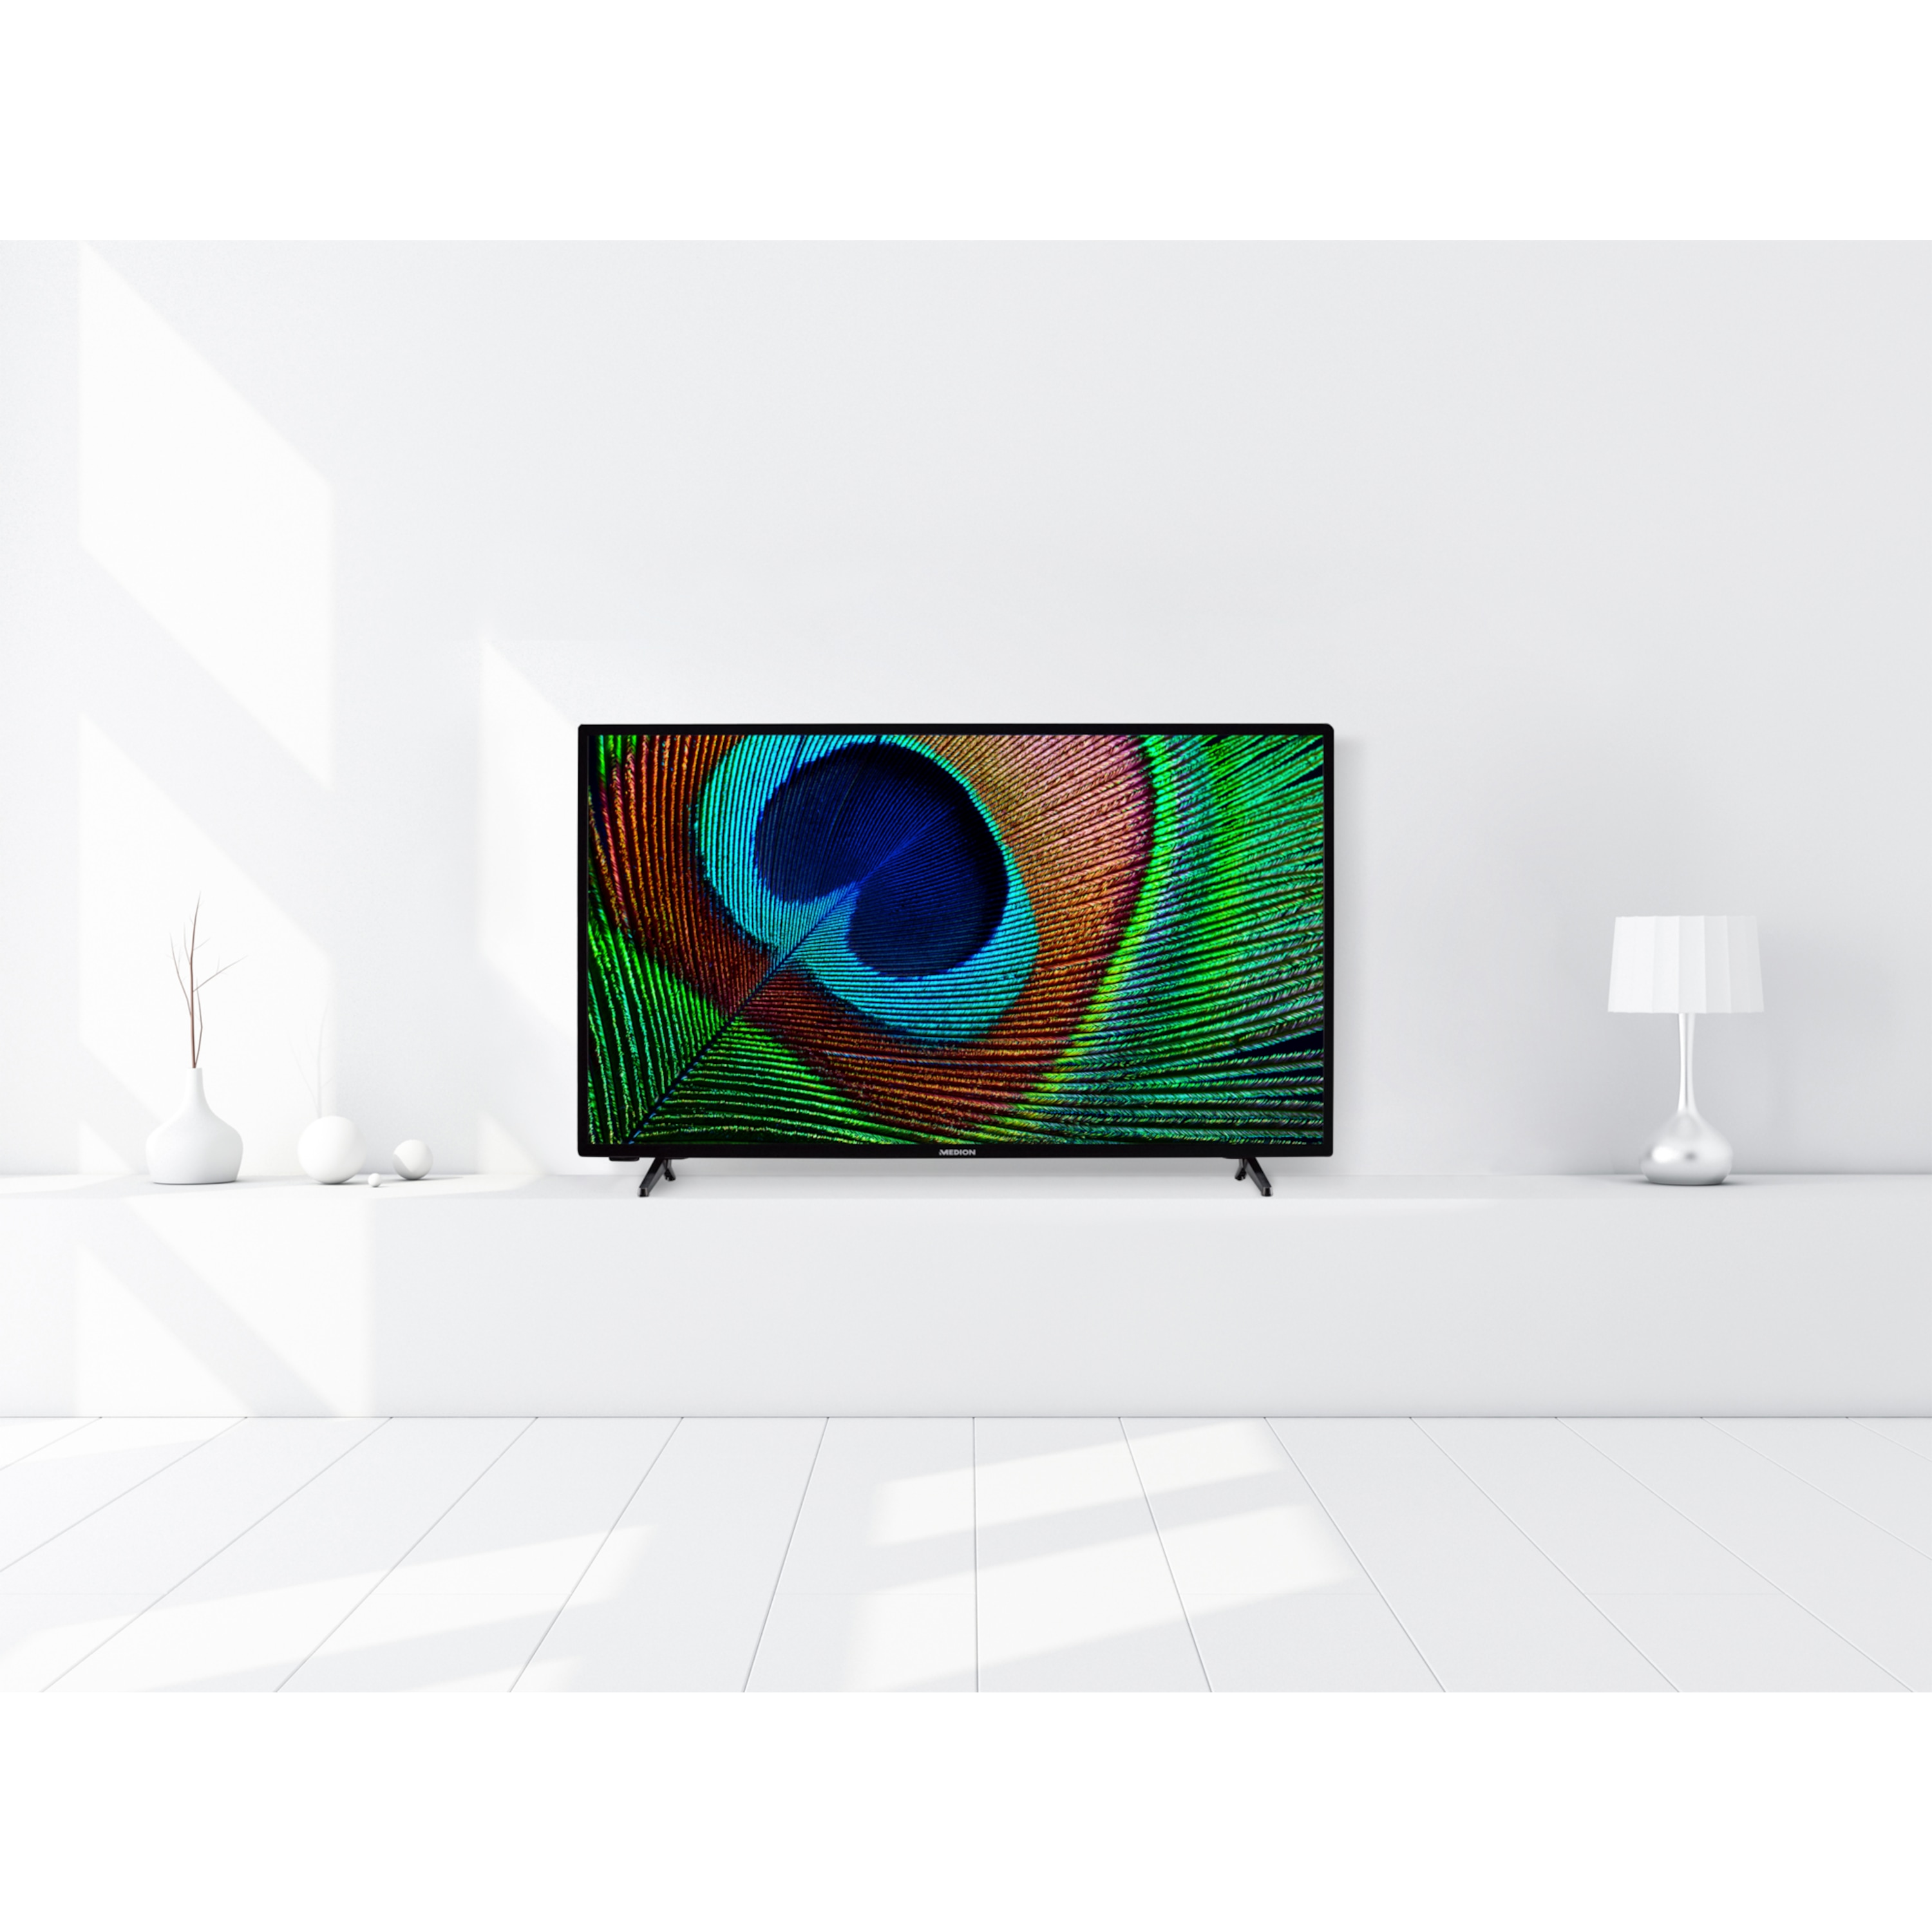 MEDION P14093 Full HD Fernseher HDR / Android) cm, Zoll, 40 Smart 100,3 TV (Flat, Fernseher 39,5 cm, Netflix Zoll HD, mit Android 100,3 TV